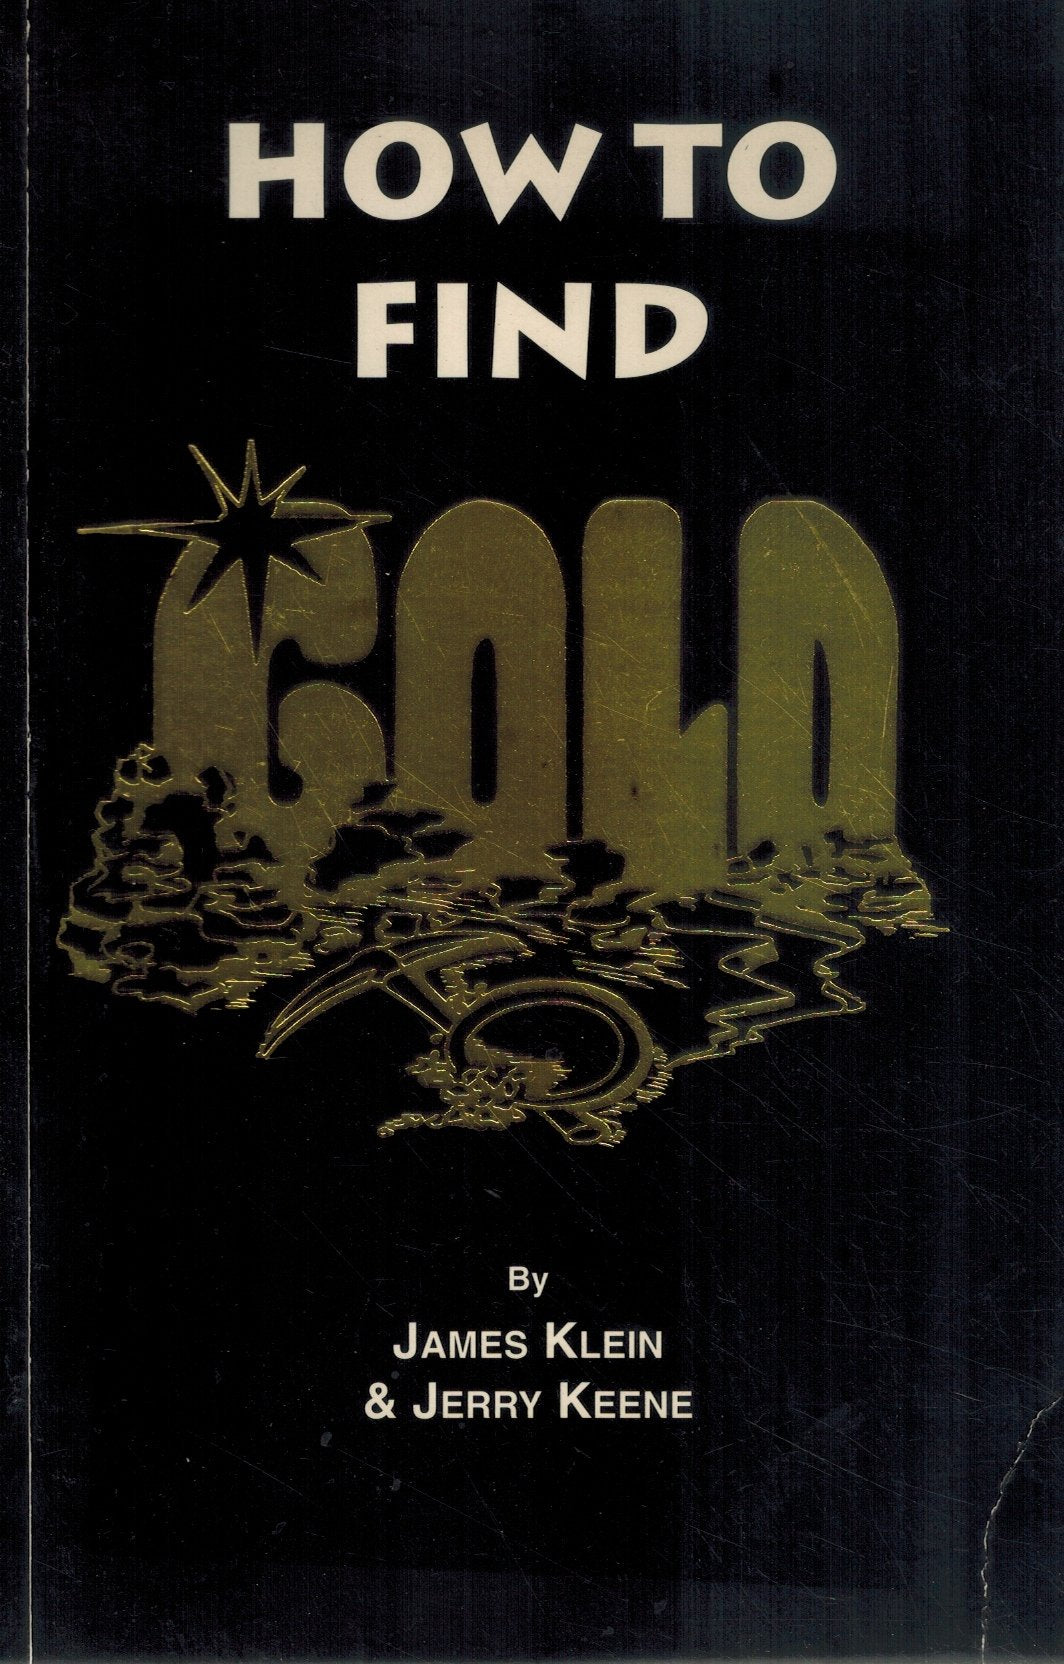 How to Find Gold  by Klein, James & Jerry Keene